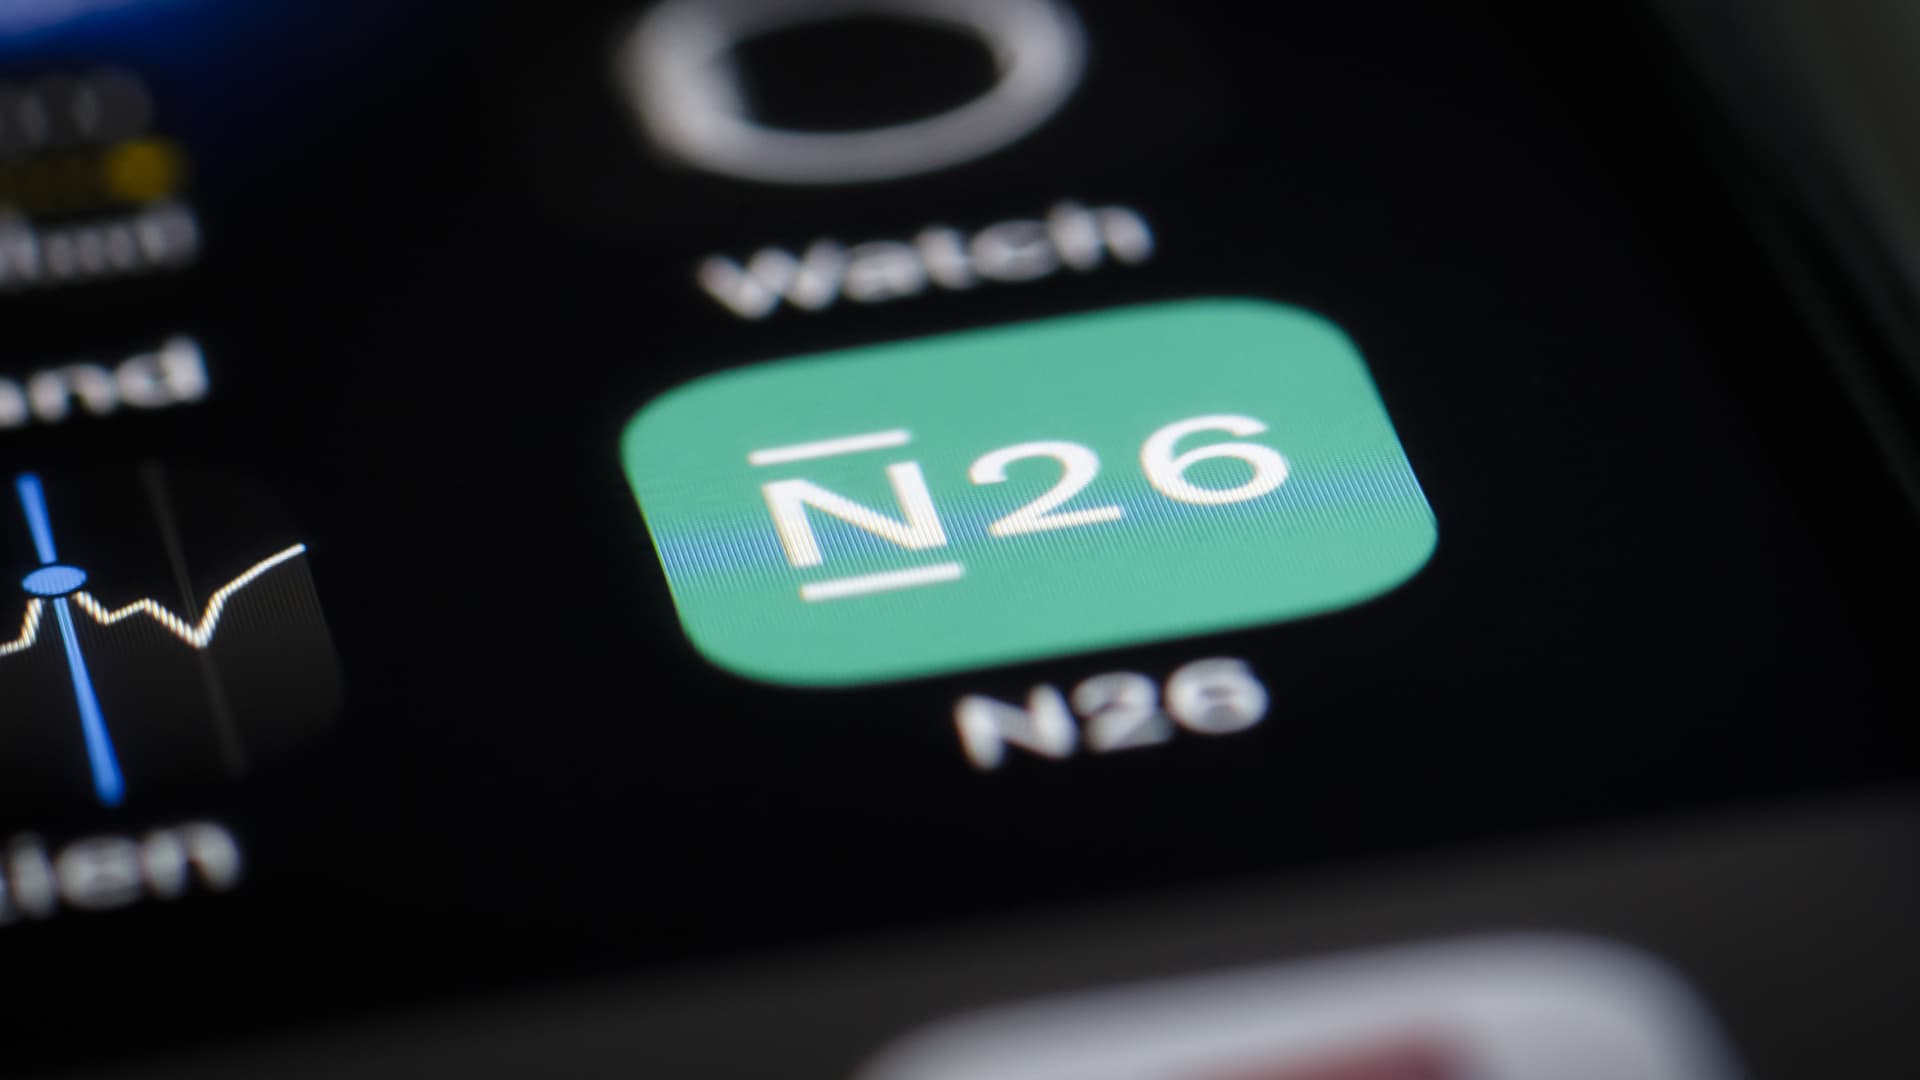 Mobile bank N26's losses widen after ramping up spending on fraud controls